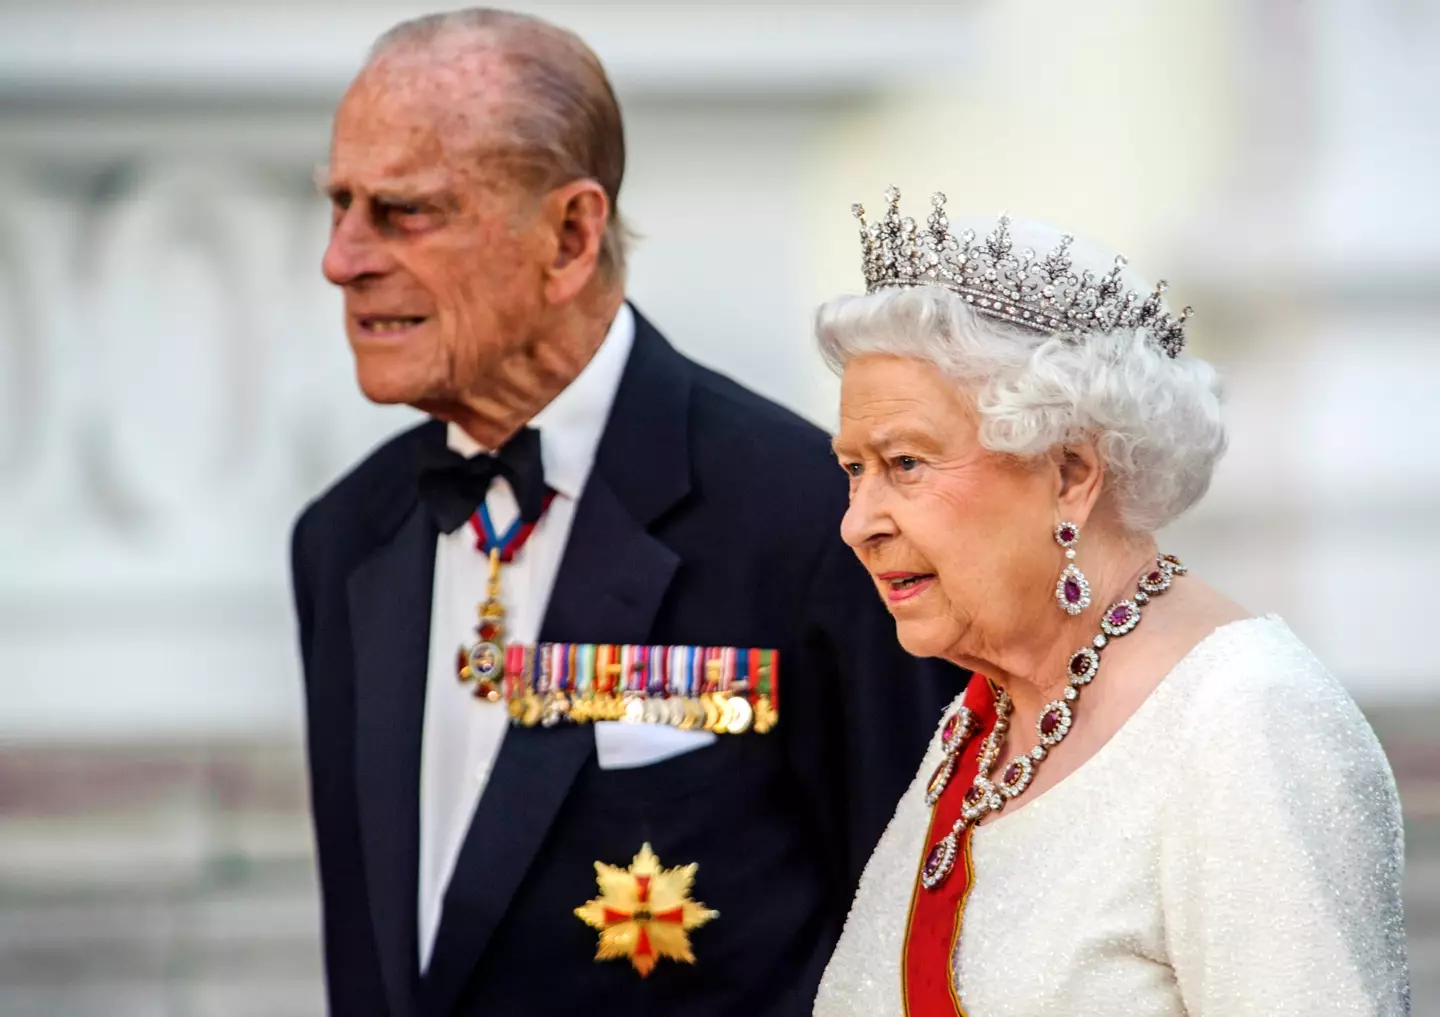 Prince Philip died at the age of 99 in April 2021.